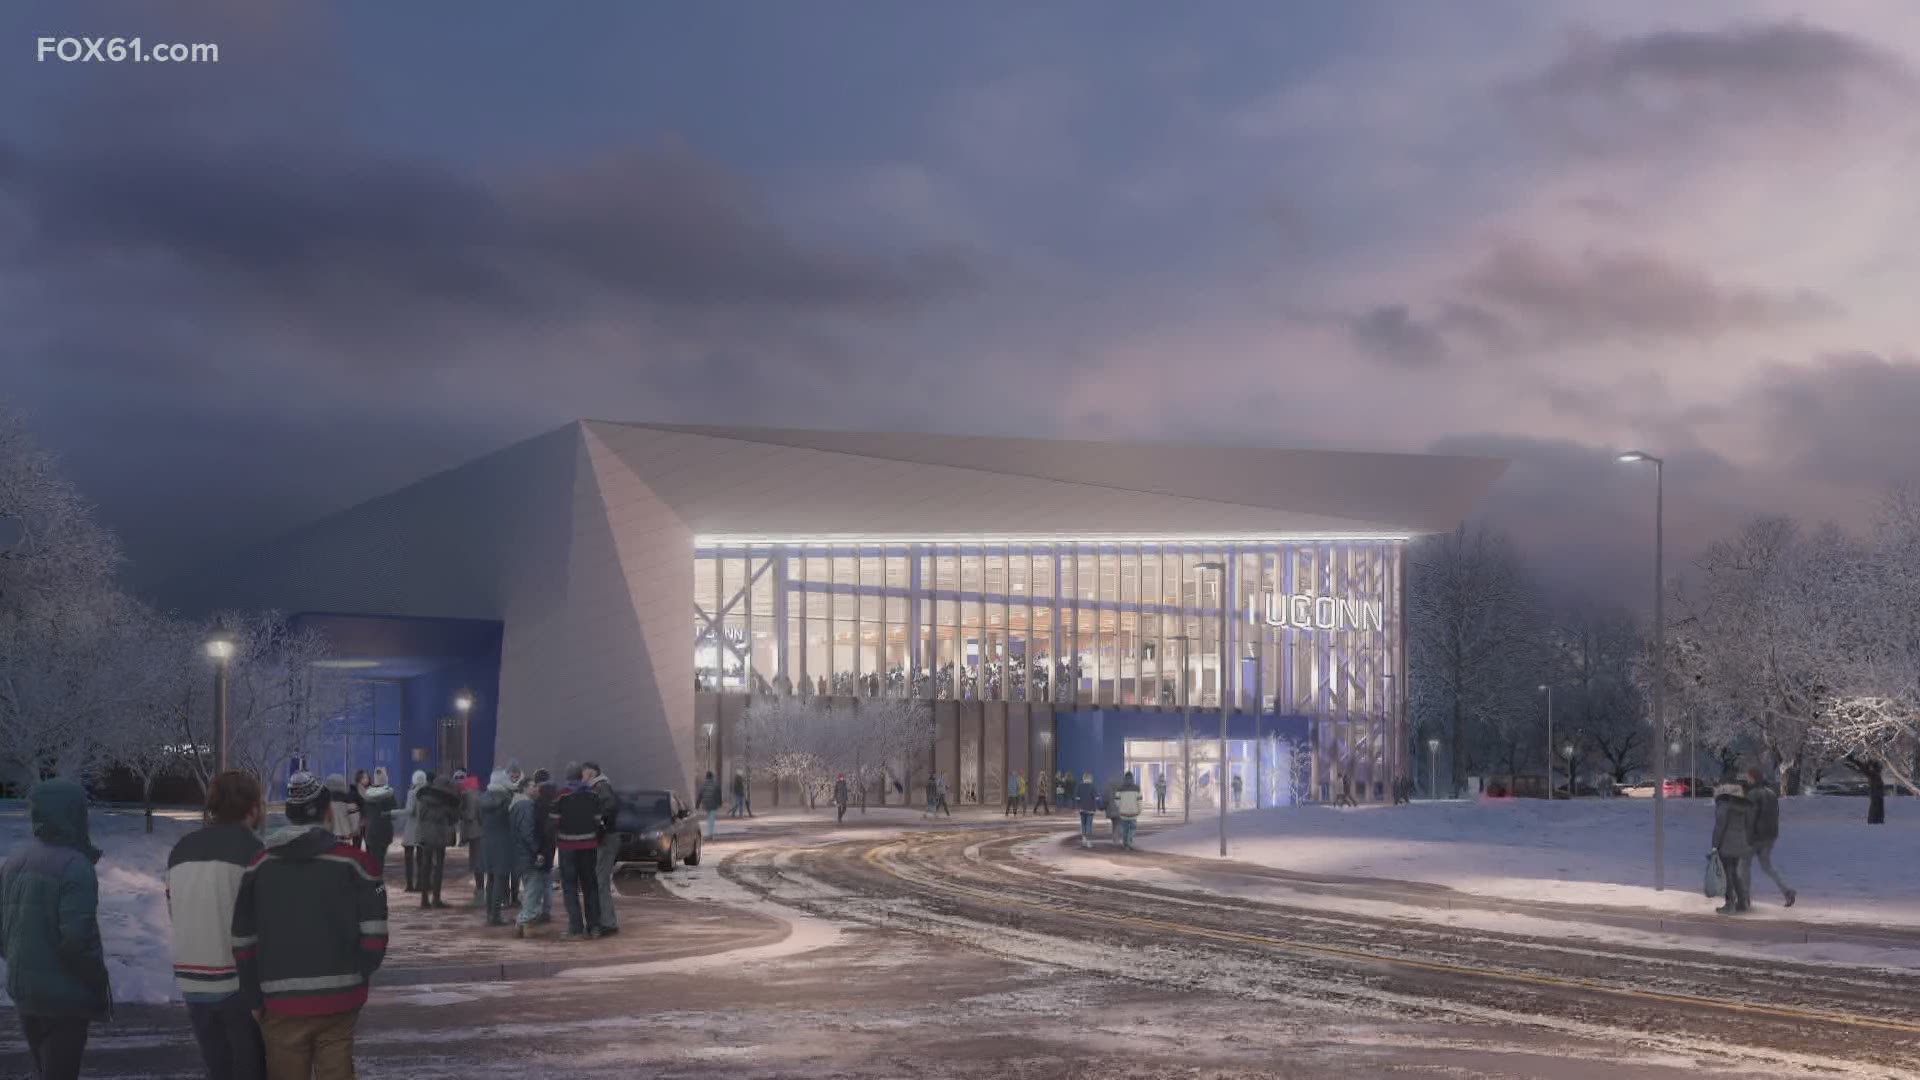 The rink would be slated to open in September 2022.